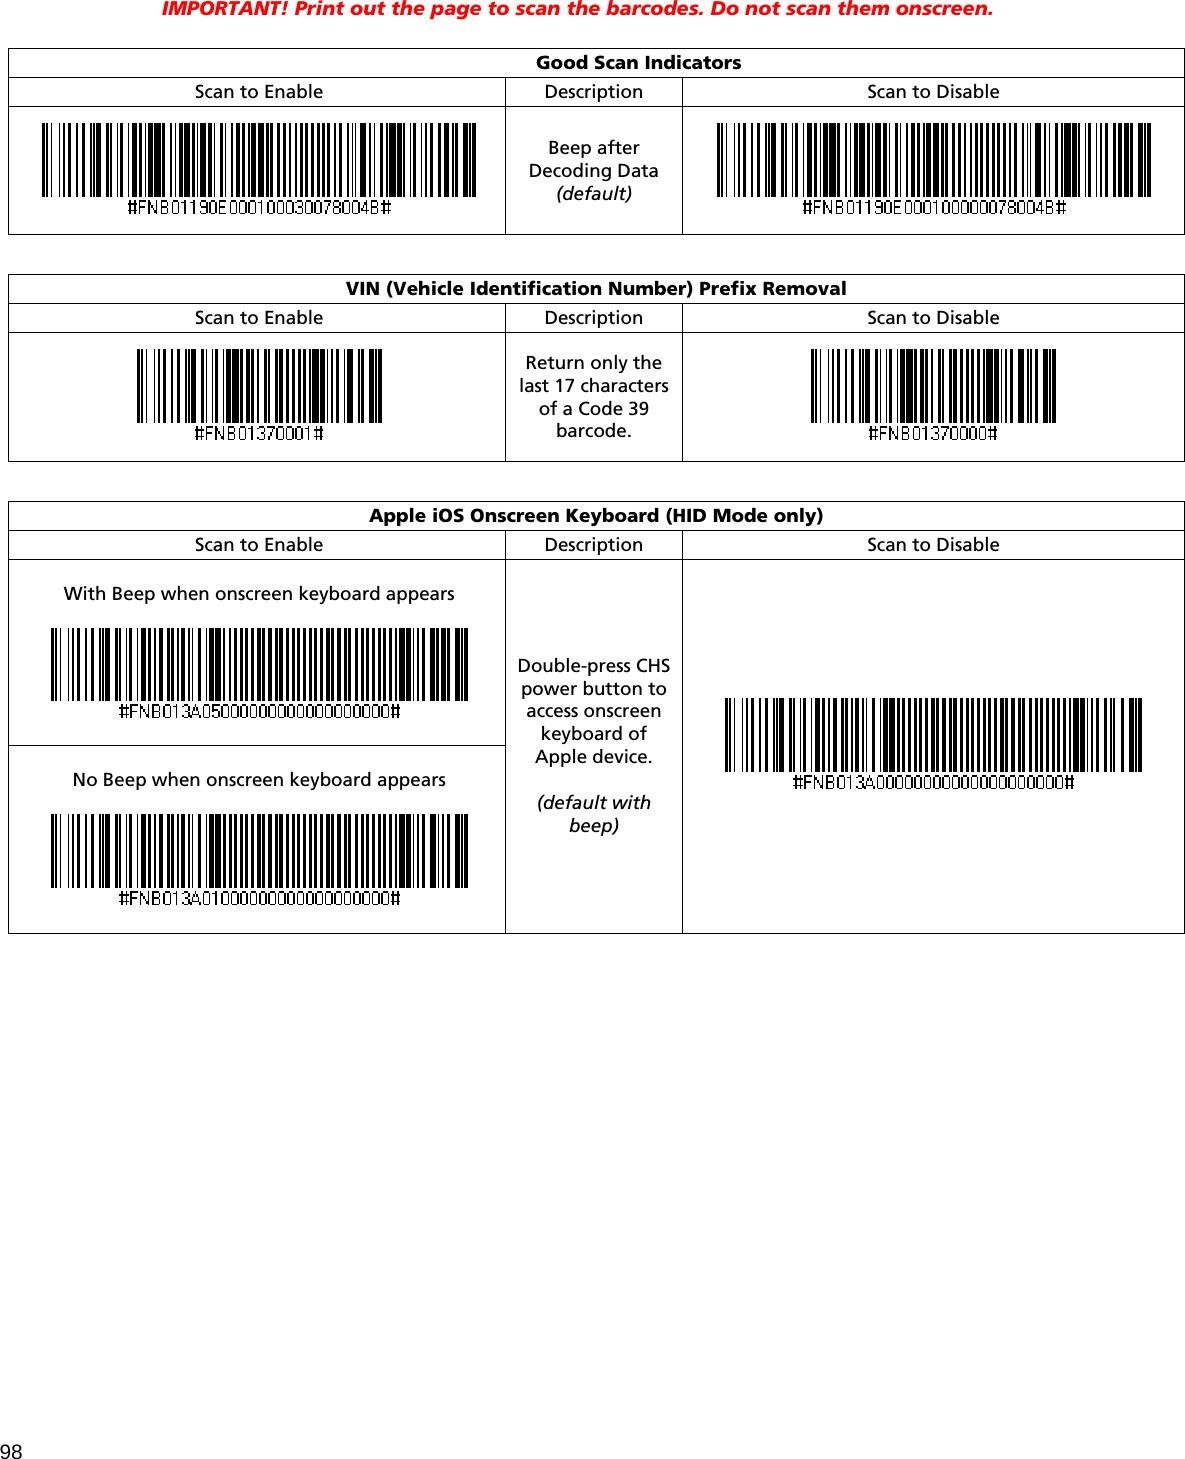 98  IMPORTANT! Print out the page to scan the barcodes. Do not scan them onscreen.   Good Scan Indicators Scan to Enable Description  Scan to Disable  Beep after Decoding Data (default)     VIN (Vehicle Identification Number) Prefix Removal Scan to Enable Description  Scan to Disable  Return only the last 17 characters of a Code 39 barcode.    Apple iOS Onscreen Keyboard (HID Mode only) Scan to Enable Description  Scan to Disable  With Beep when onscreen keyboard appears     No Beep when onscreen keyboard appears    Double-press CHS power button to access onscreen keyboard of Apple device.  (default with beep)     